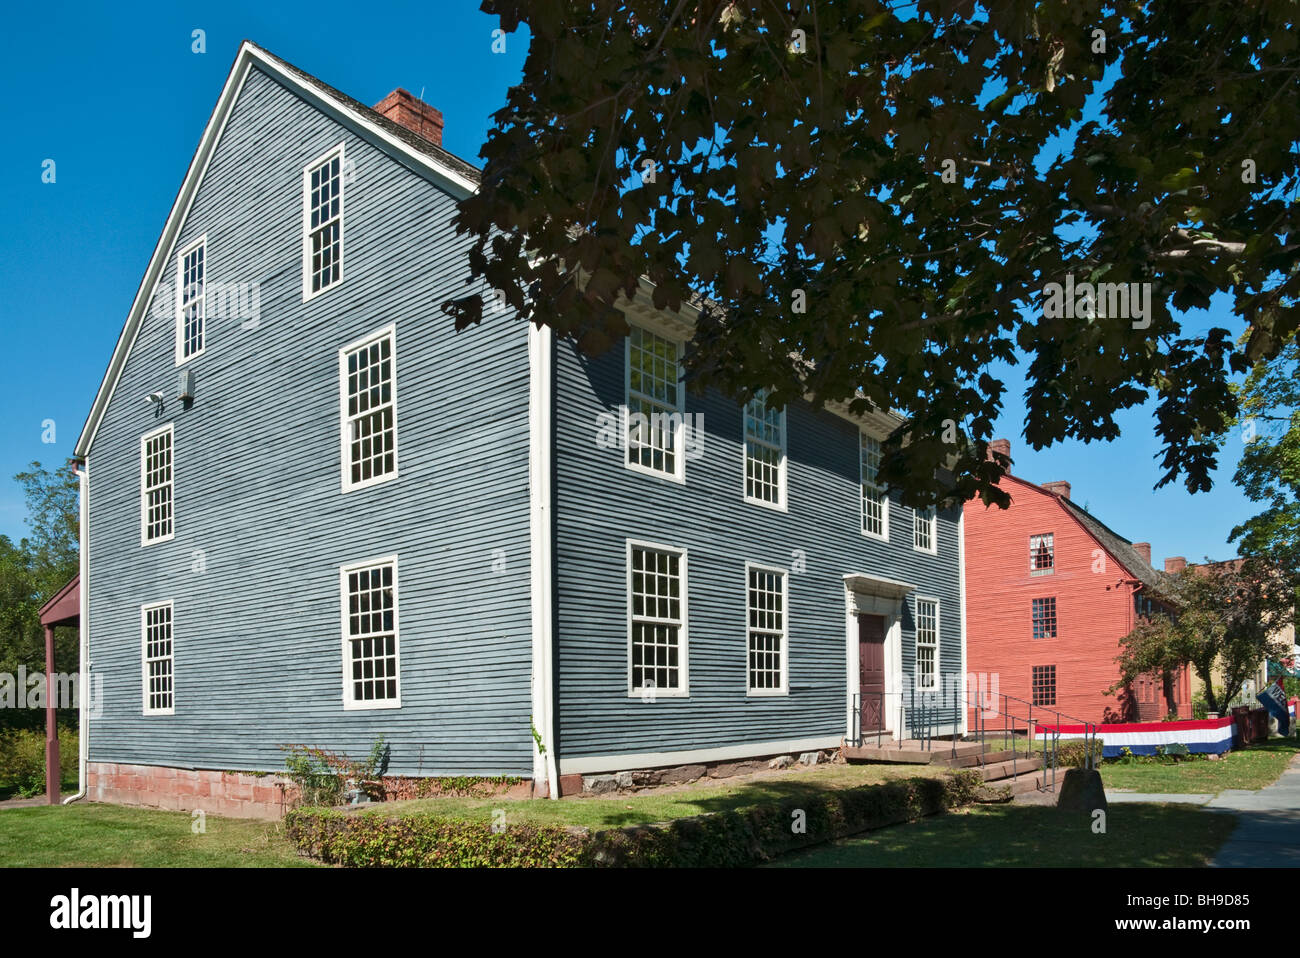 Connecticut Old Town Wethersfield National Historic Site Silas Deane House gebaut 1776 Stockfoto